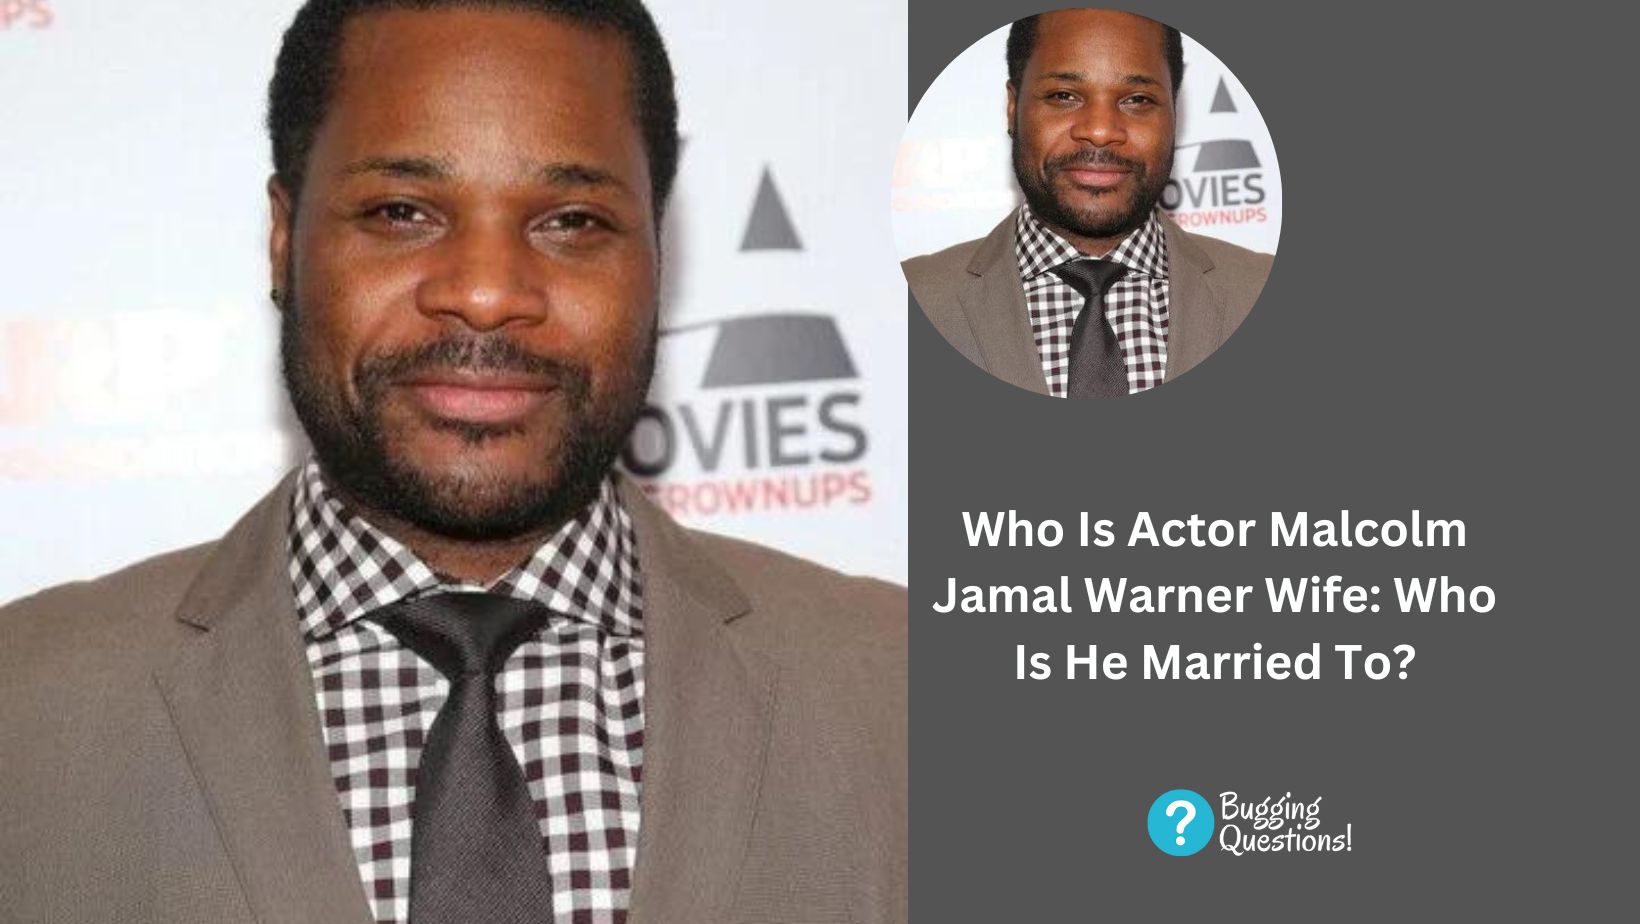 Who Is Actor Malcolm Jamal Warner Wife: Who Is He Married To?